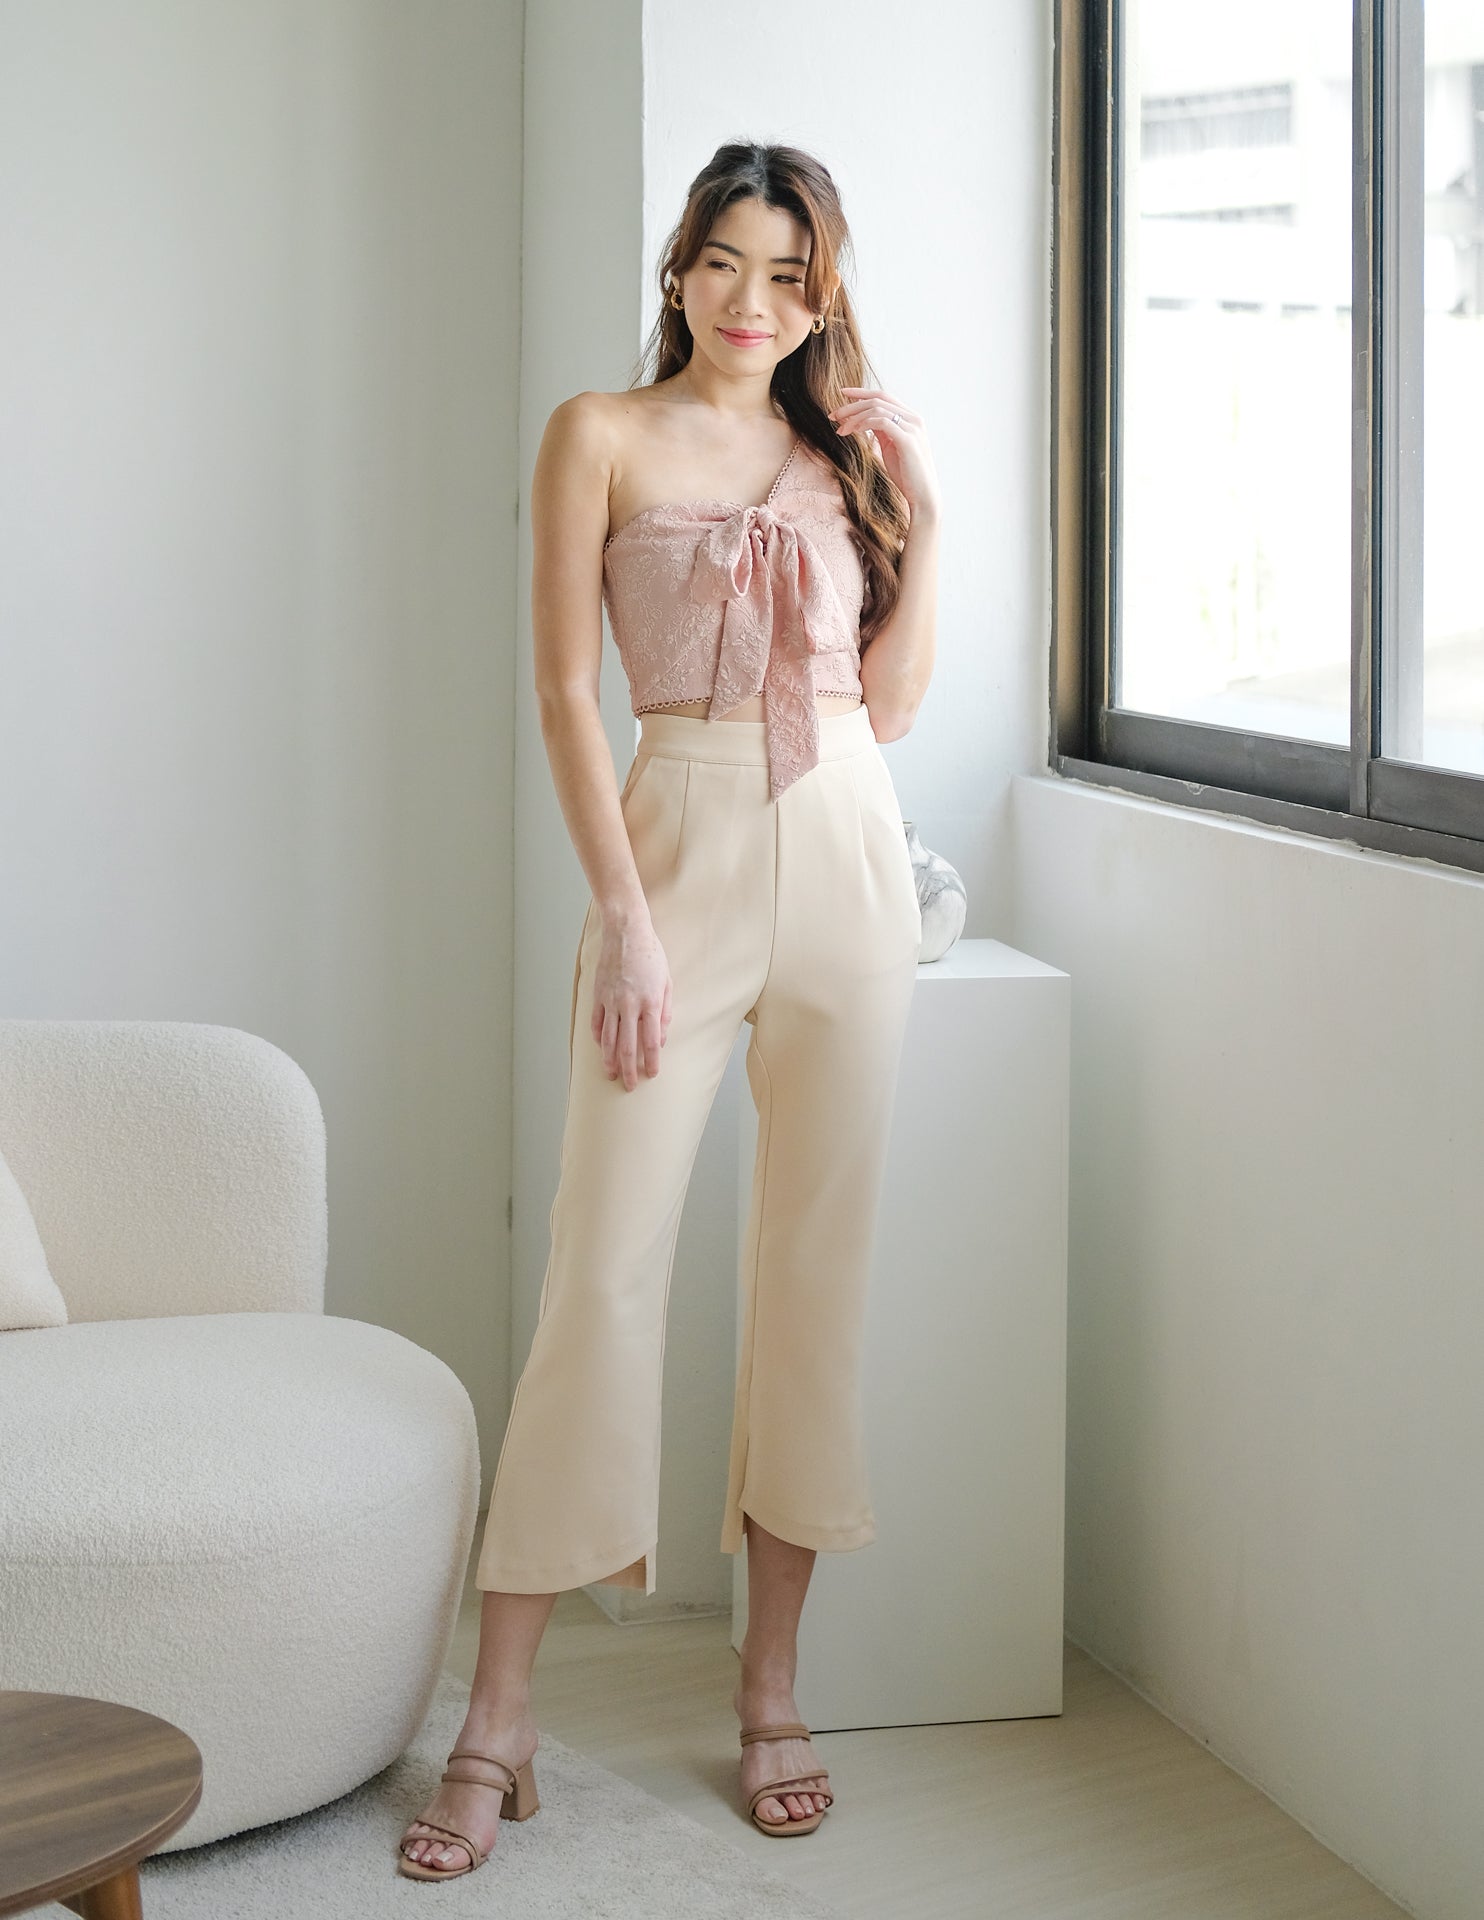 Abigail Jacquard Top in Pink